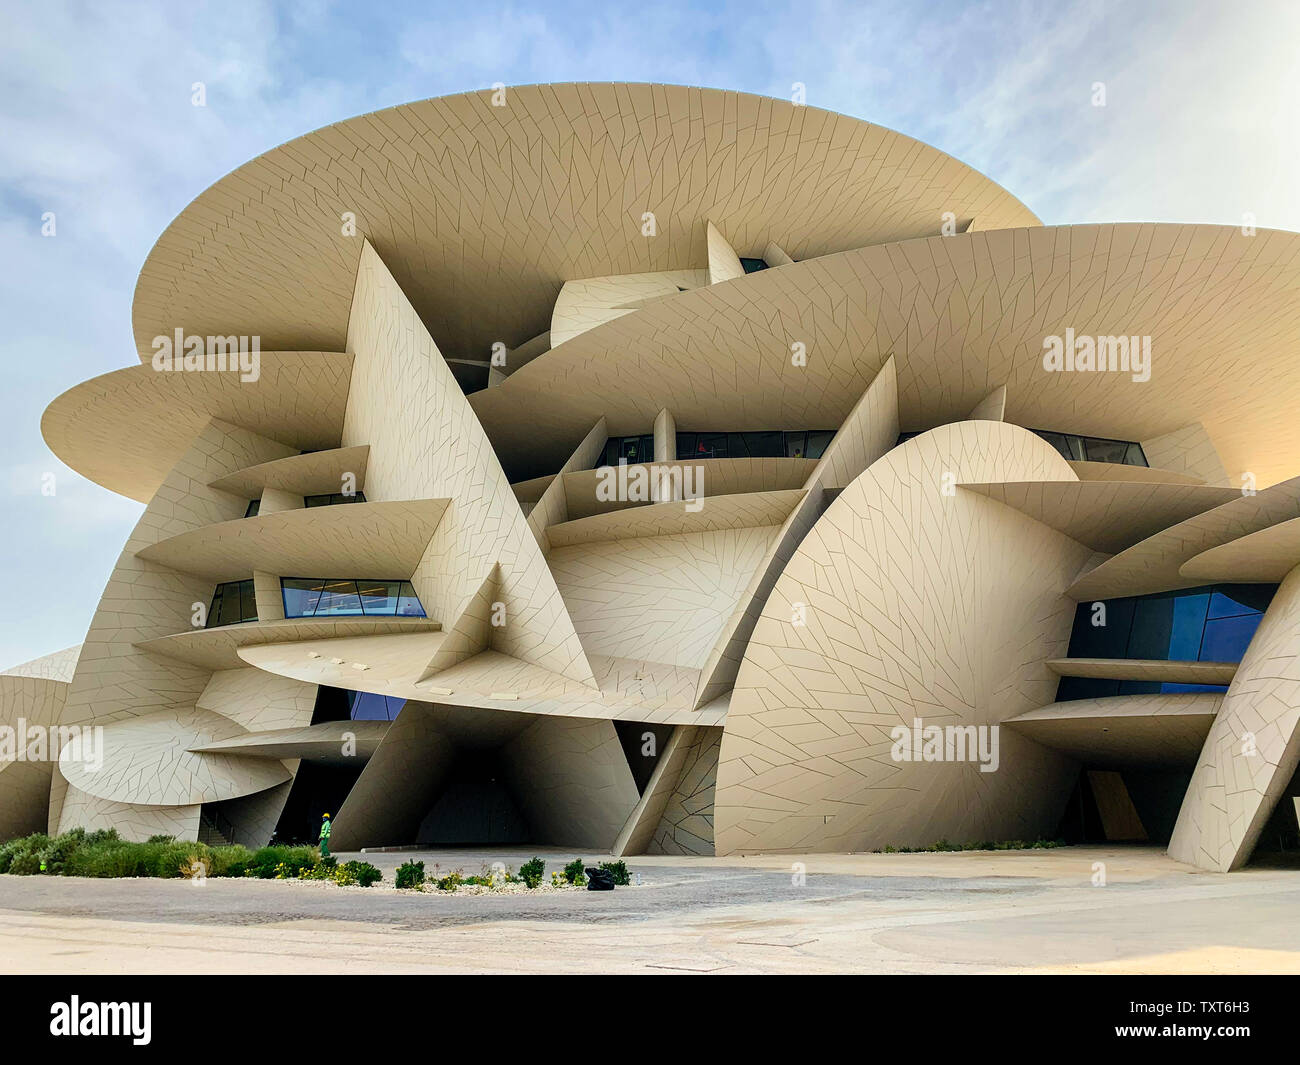 Part of the structure of the new National Museum of Doha in Qatar in the shape of a desert rose, April 2019 Stock Photo